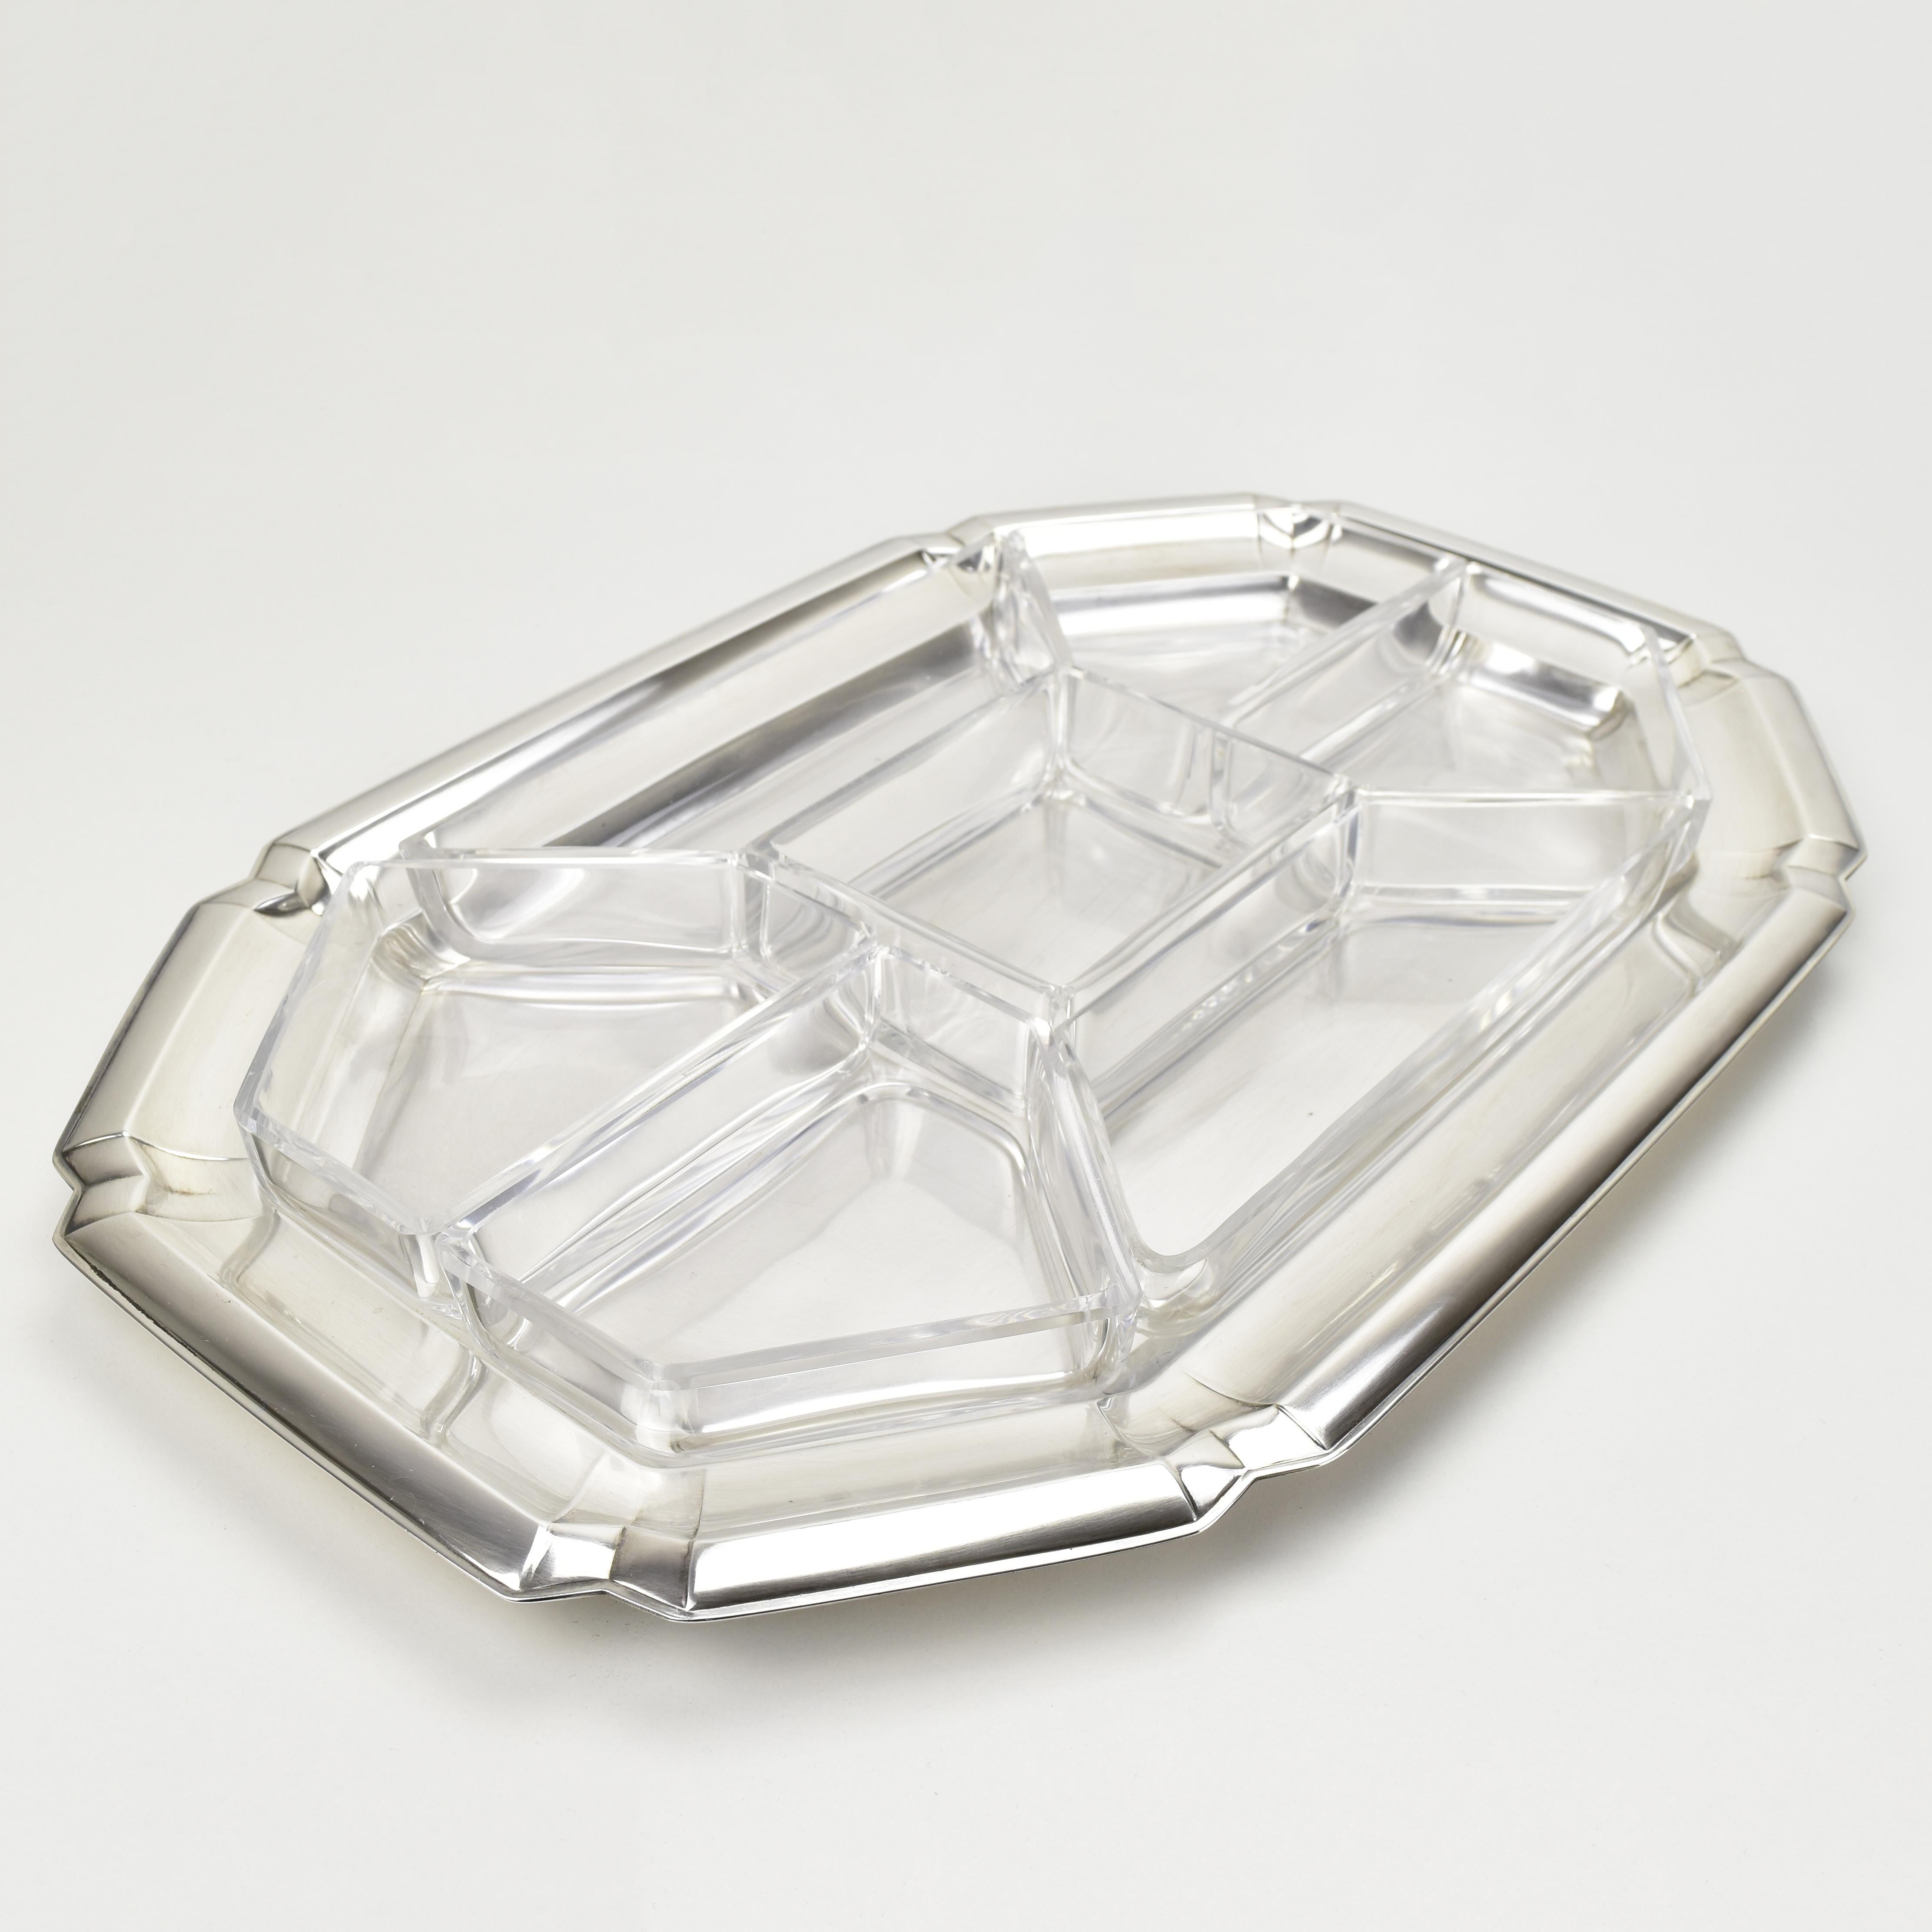 Early 20th Century Large Art Deco Cabaret Bar Snack Tray by Quist Silverplate & Cut Crystal Liners For Sale